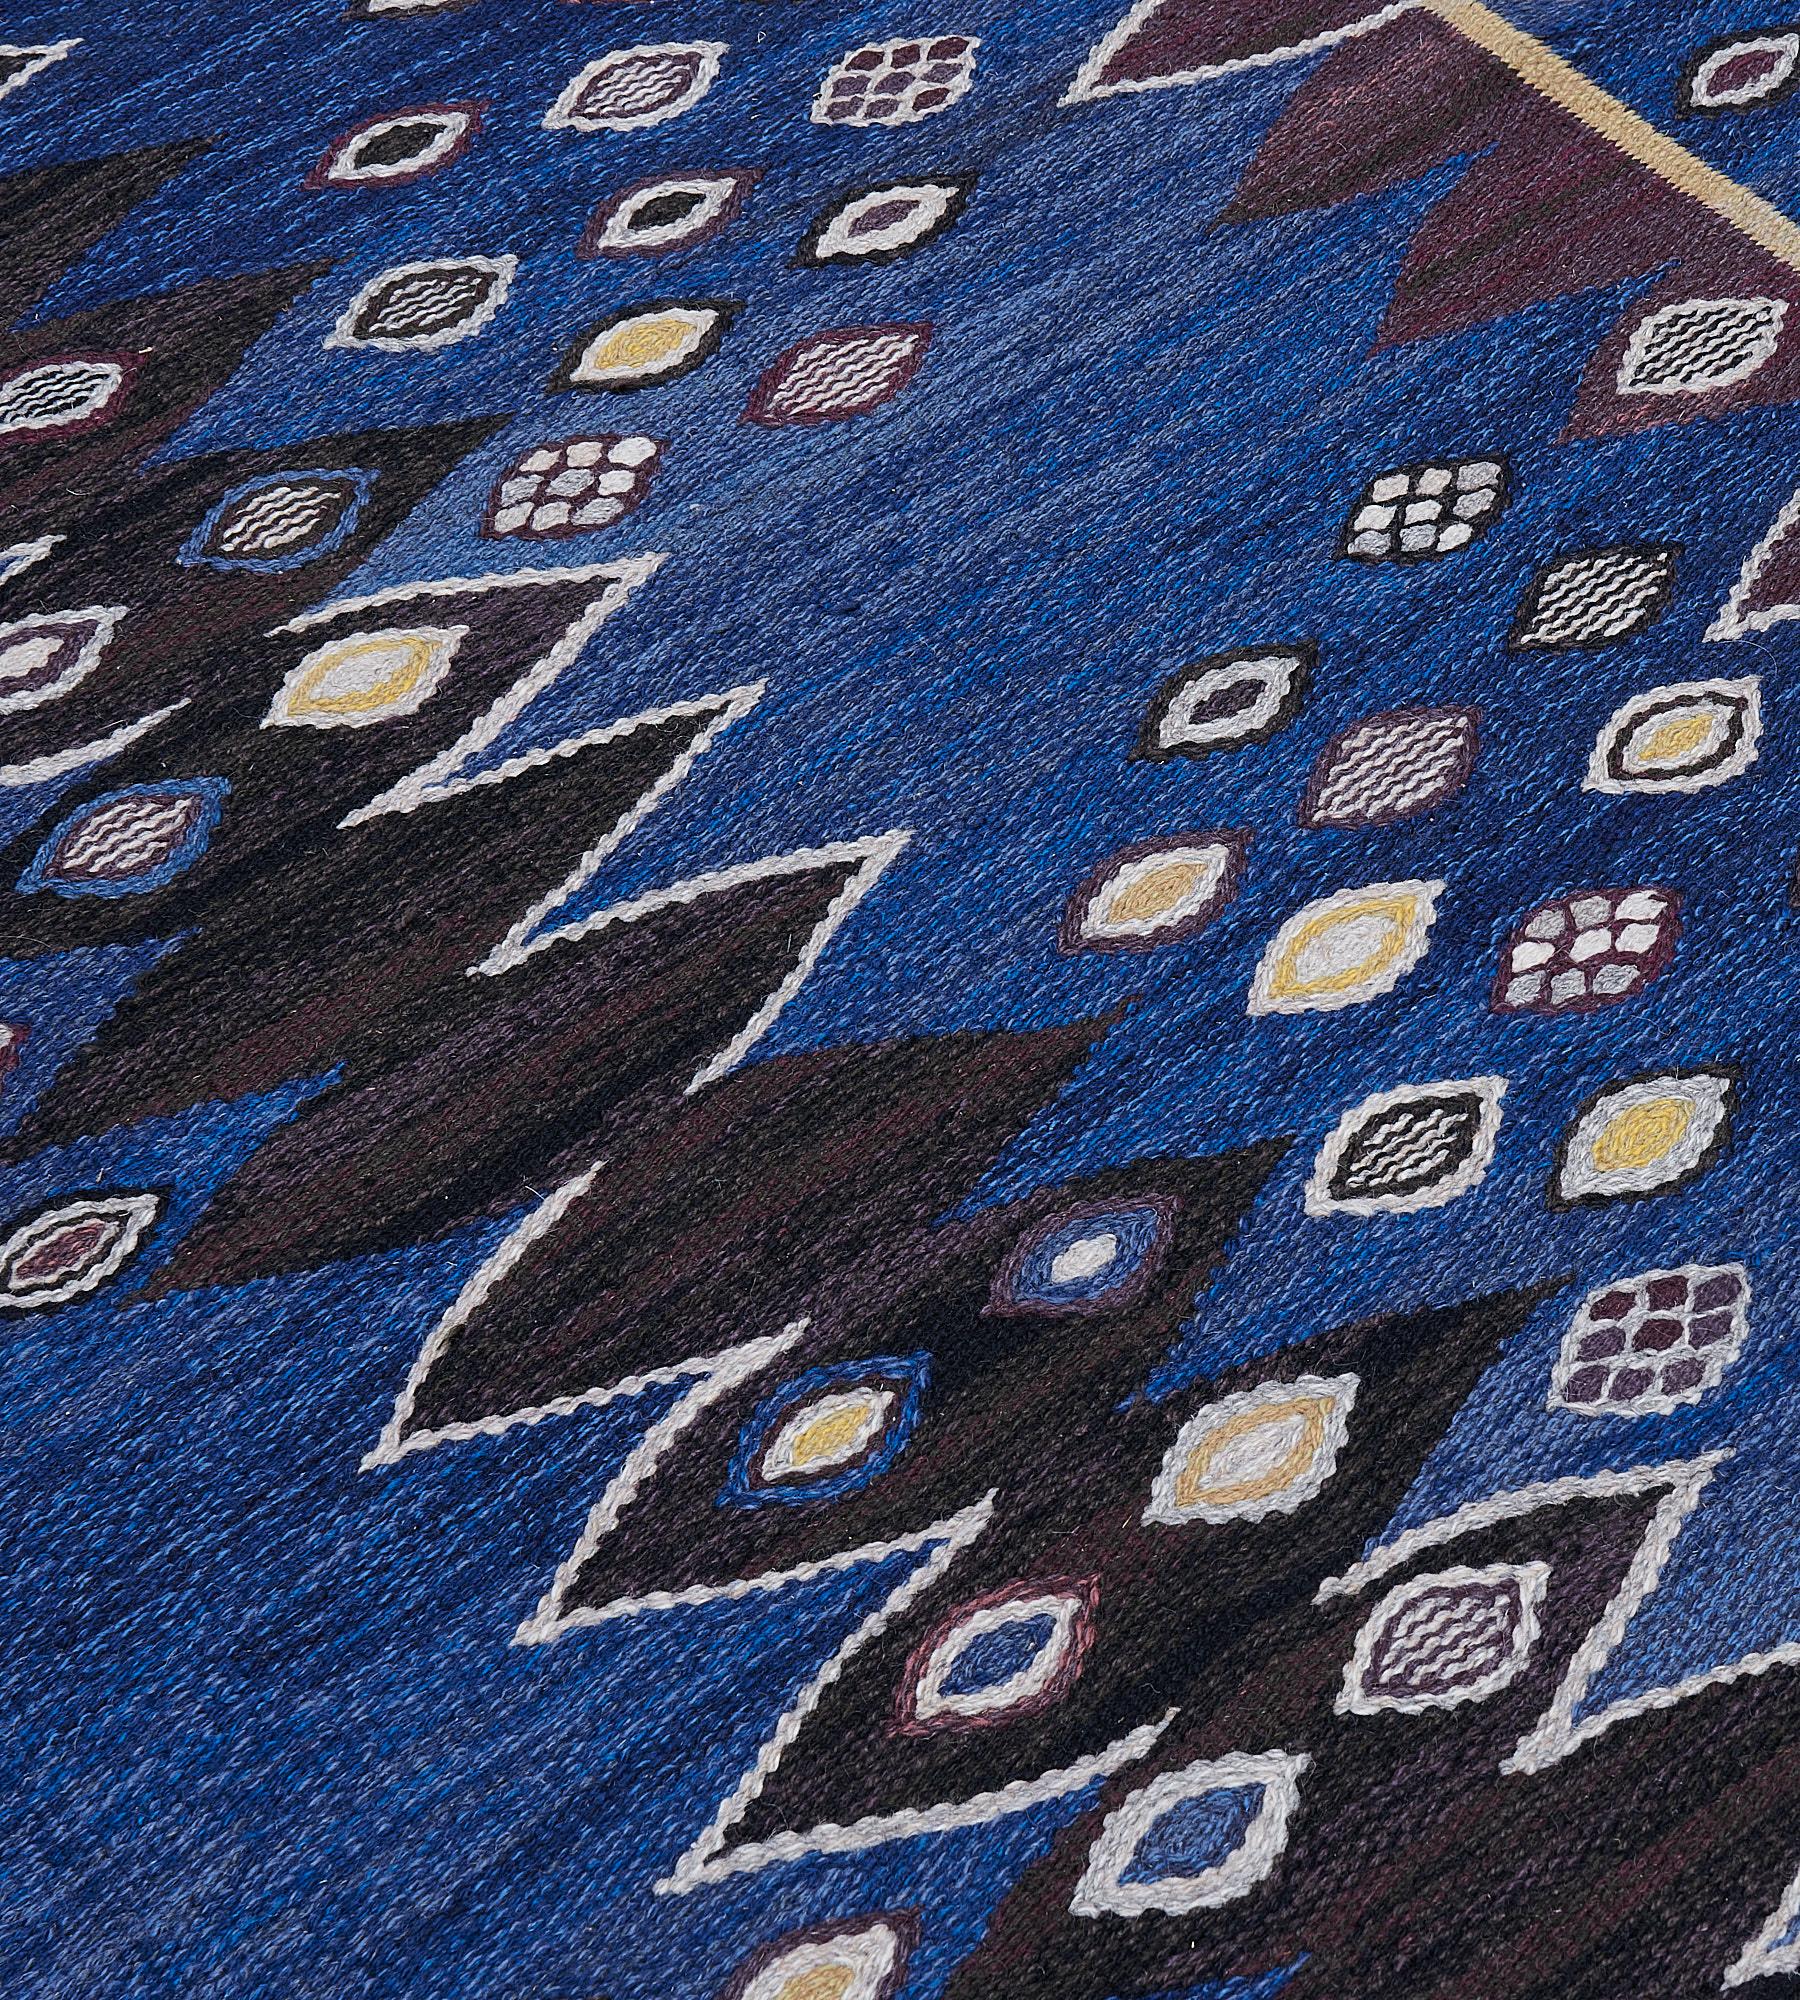 Drawing inspiration from the ocean, this vintage hand-woven Swedish rug, called the Snäckorna pattern, has strands of sea shells repeatadly strewn over a surface of varying blues. A Snäckorna is in the permanent collection of Nationalmuesum,